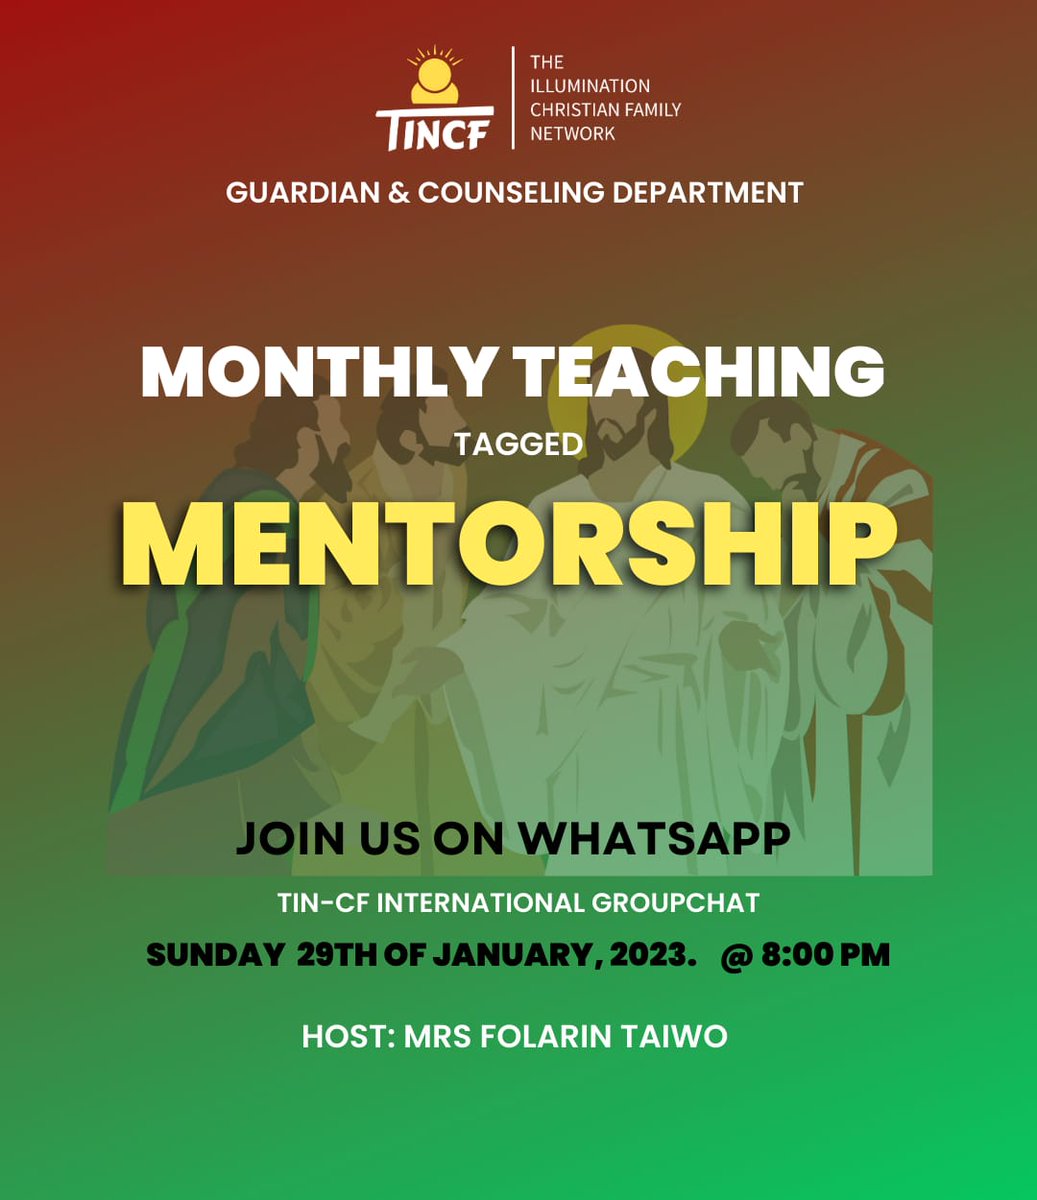 The Guidance and Counseling department invites you to make yourself available to be taught the rudiments of mentorship.

Date: 29th January, 2023.
Time:  8pm 
Venue: TIN-CF INT WHATSAPP  
Speaker: Mrs Folarin Taiwo

Contact 
wa.me/message/SIB6QW…

Join us!
#MentoringSummit